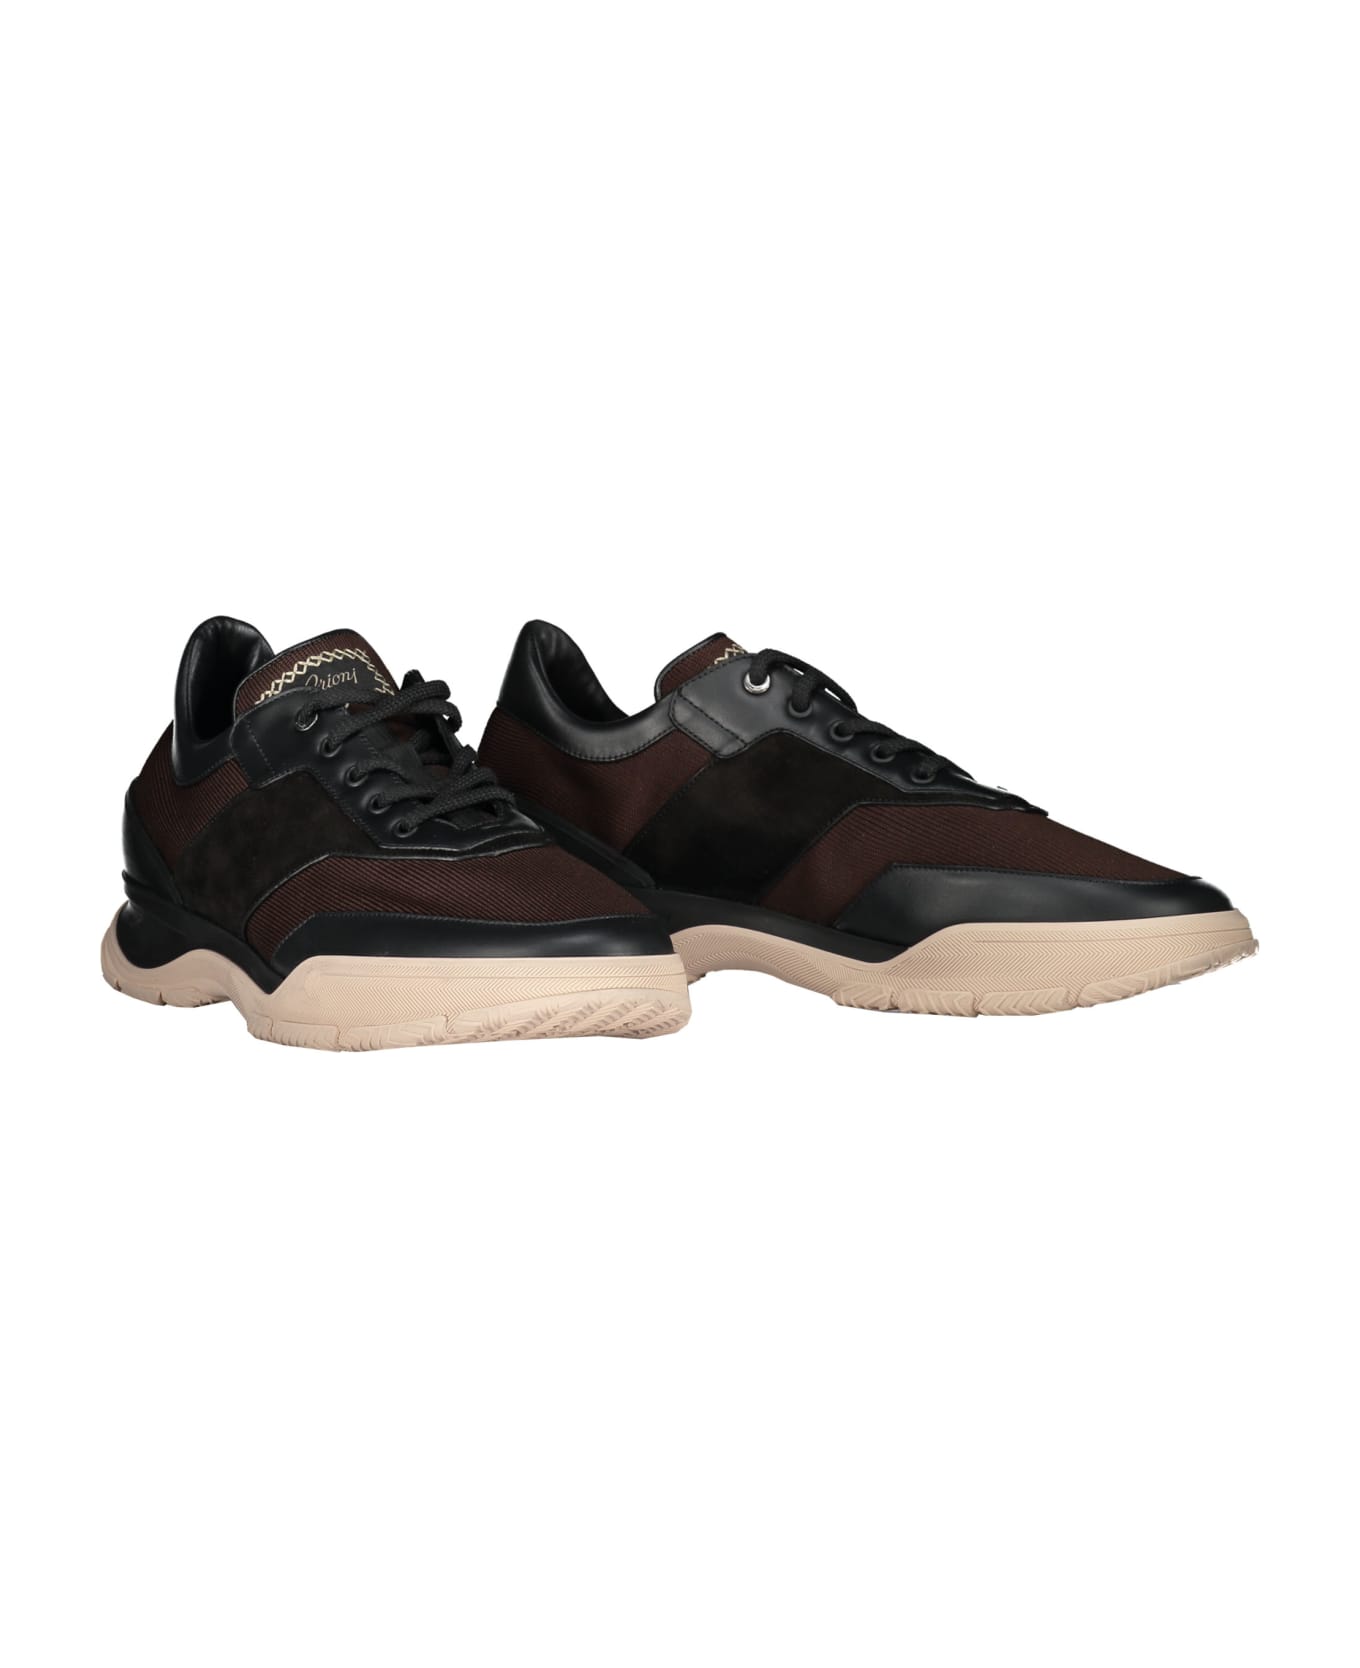 Brioni Leather Sneakers - brown